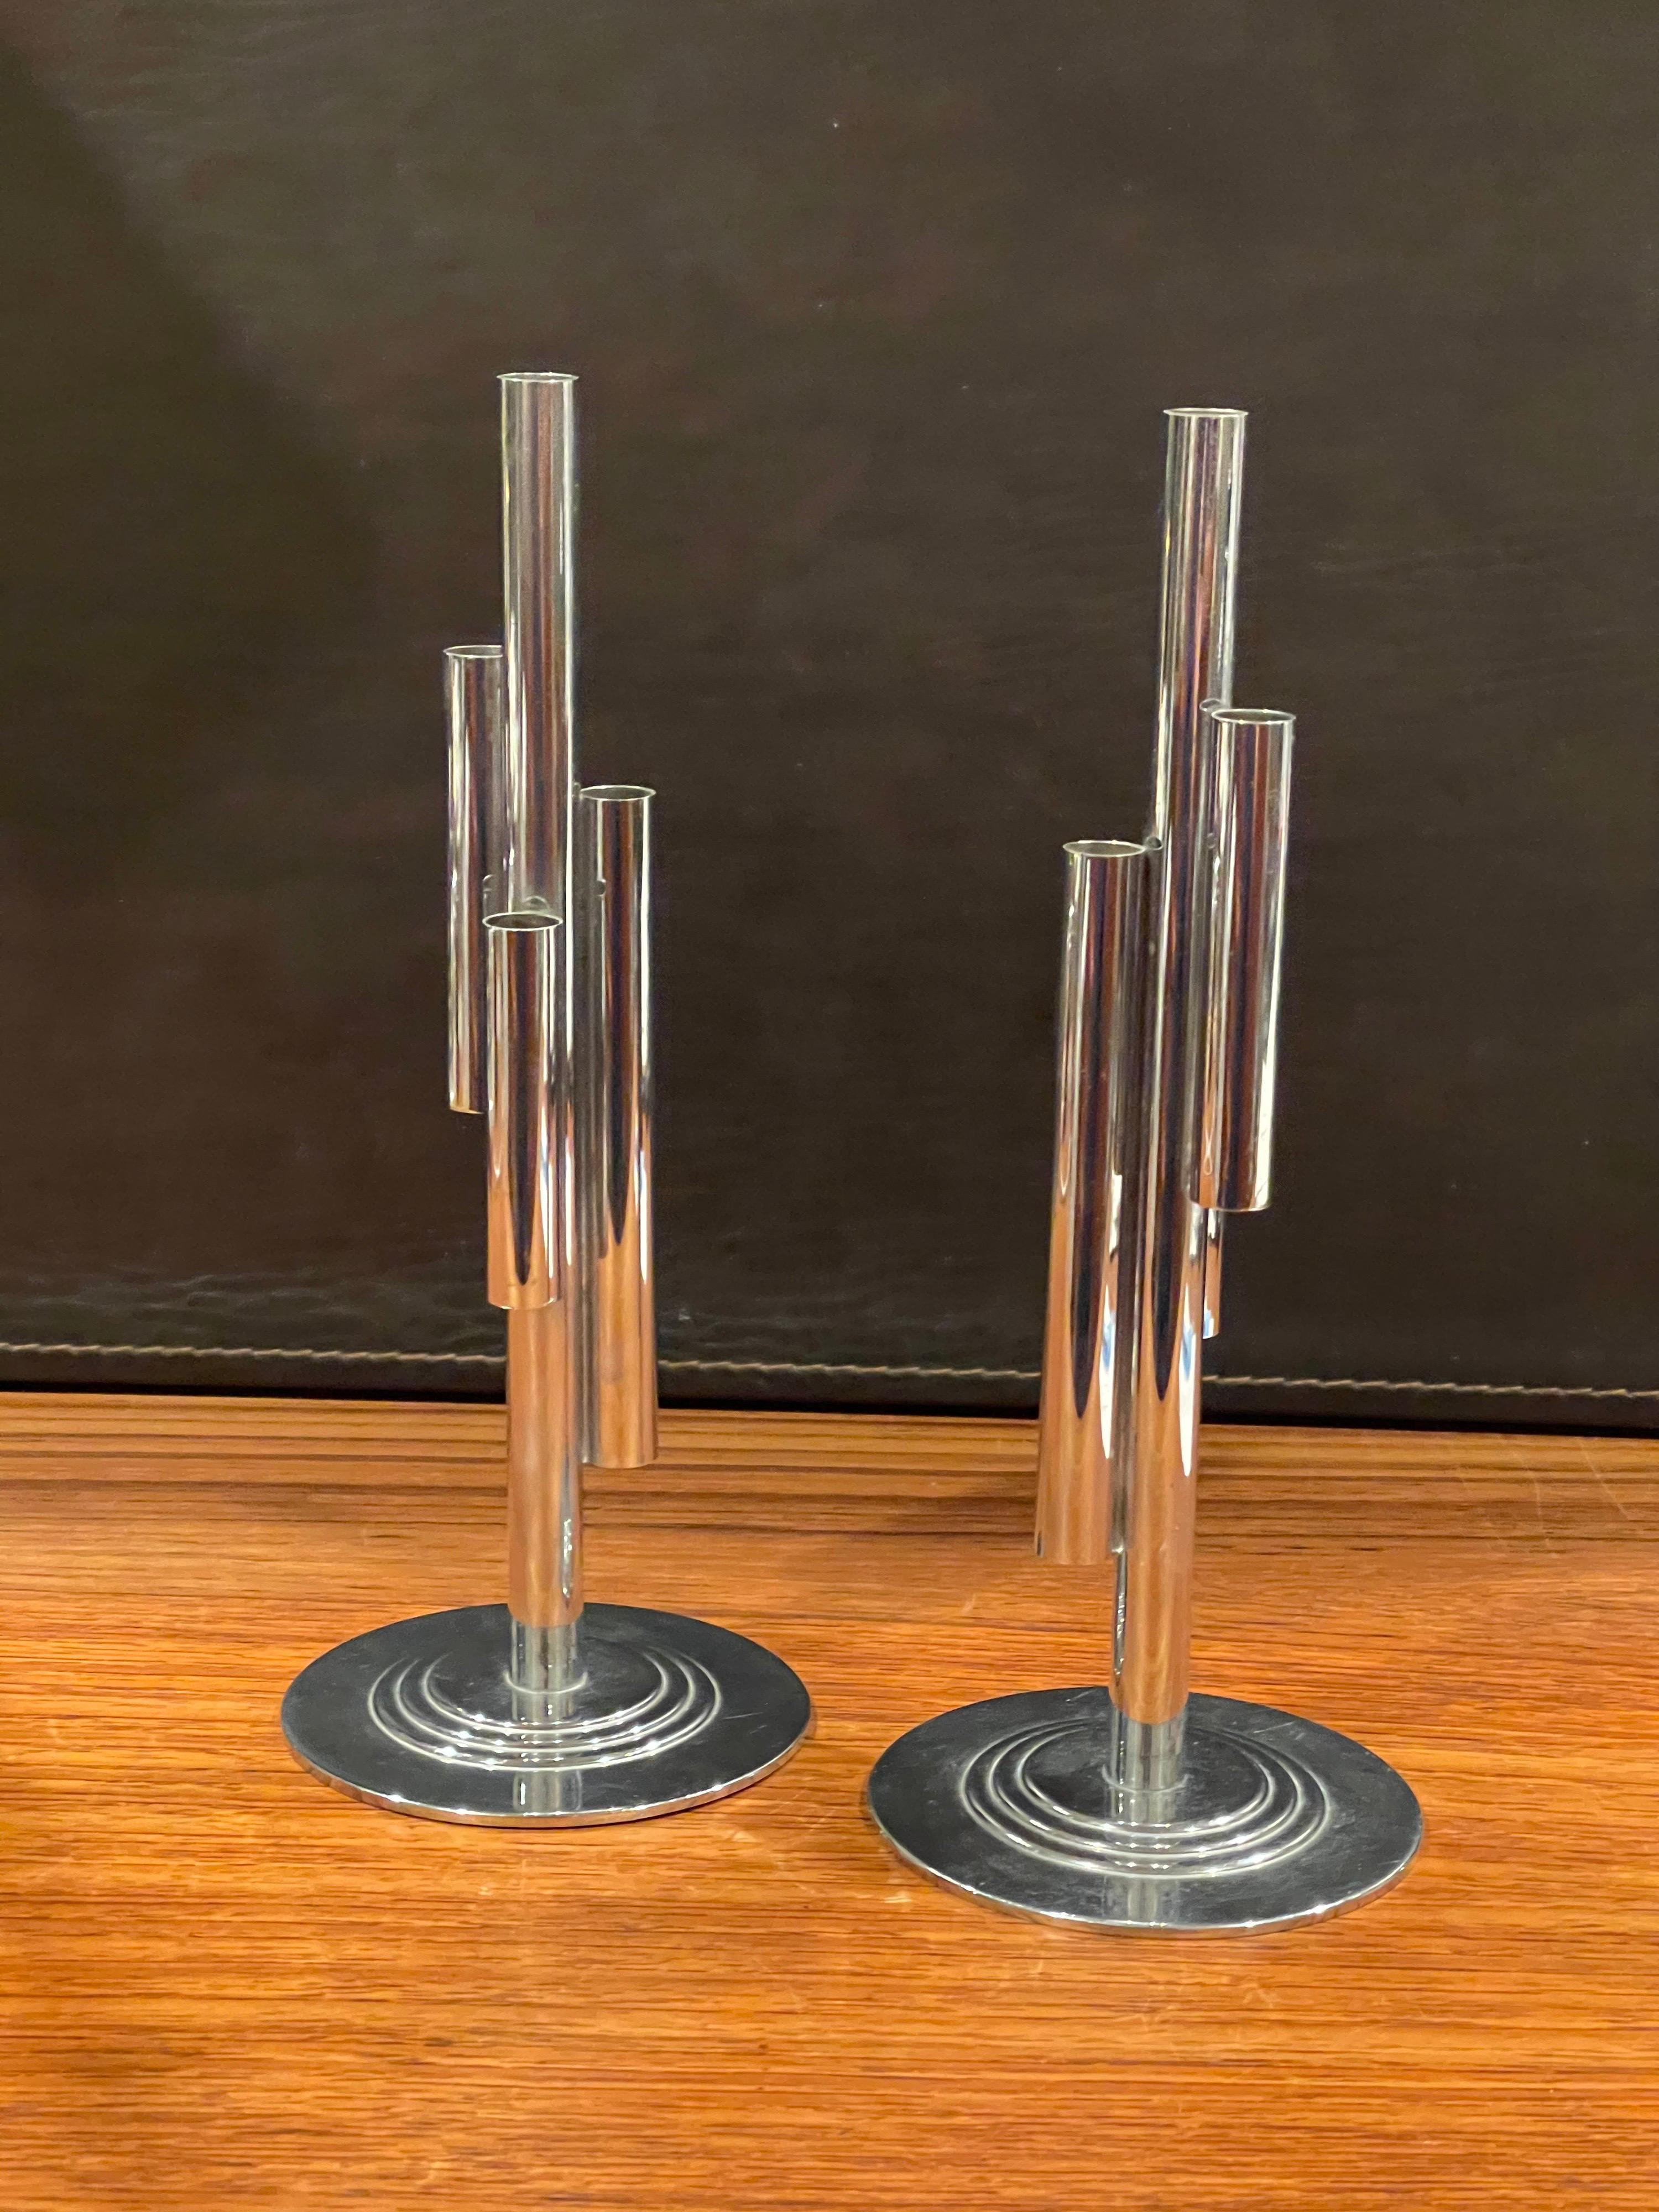 Wonderful pair of Art Deco tubular chrome bud vases by Ruth & William Gerth for Chase & Co., circa 1930s. The design features a central chrome tube attached to which are three tubes of varying lengths and heights and mounted to a circular four